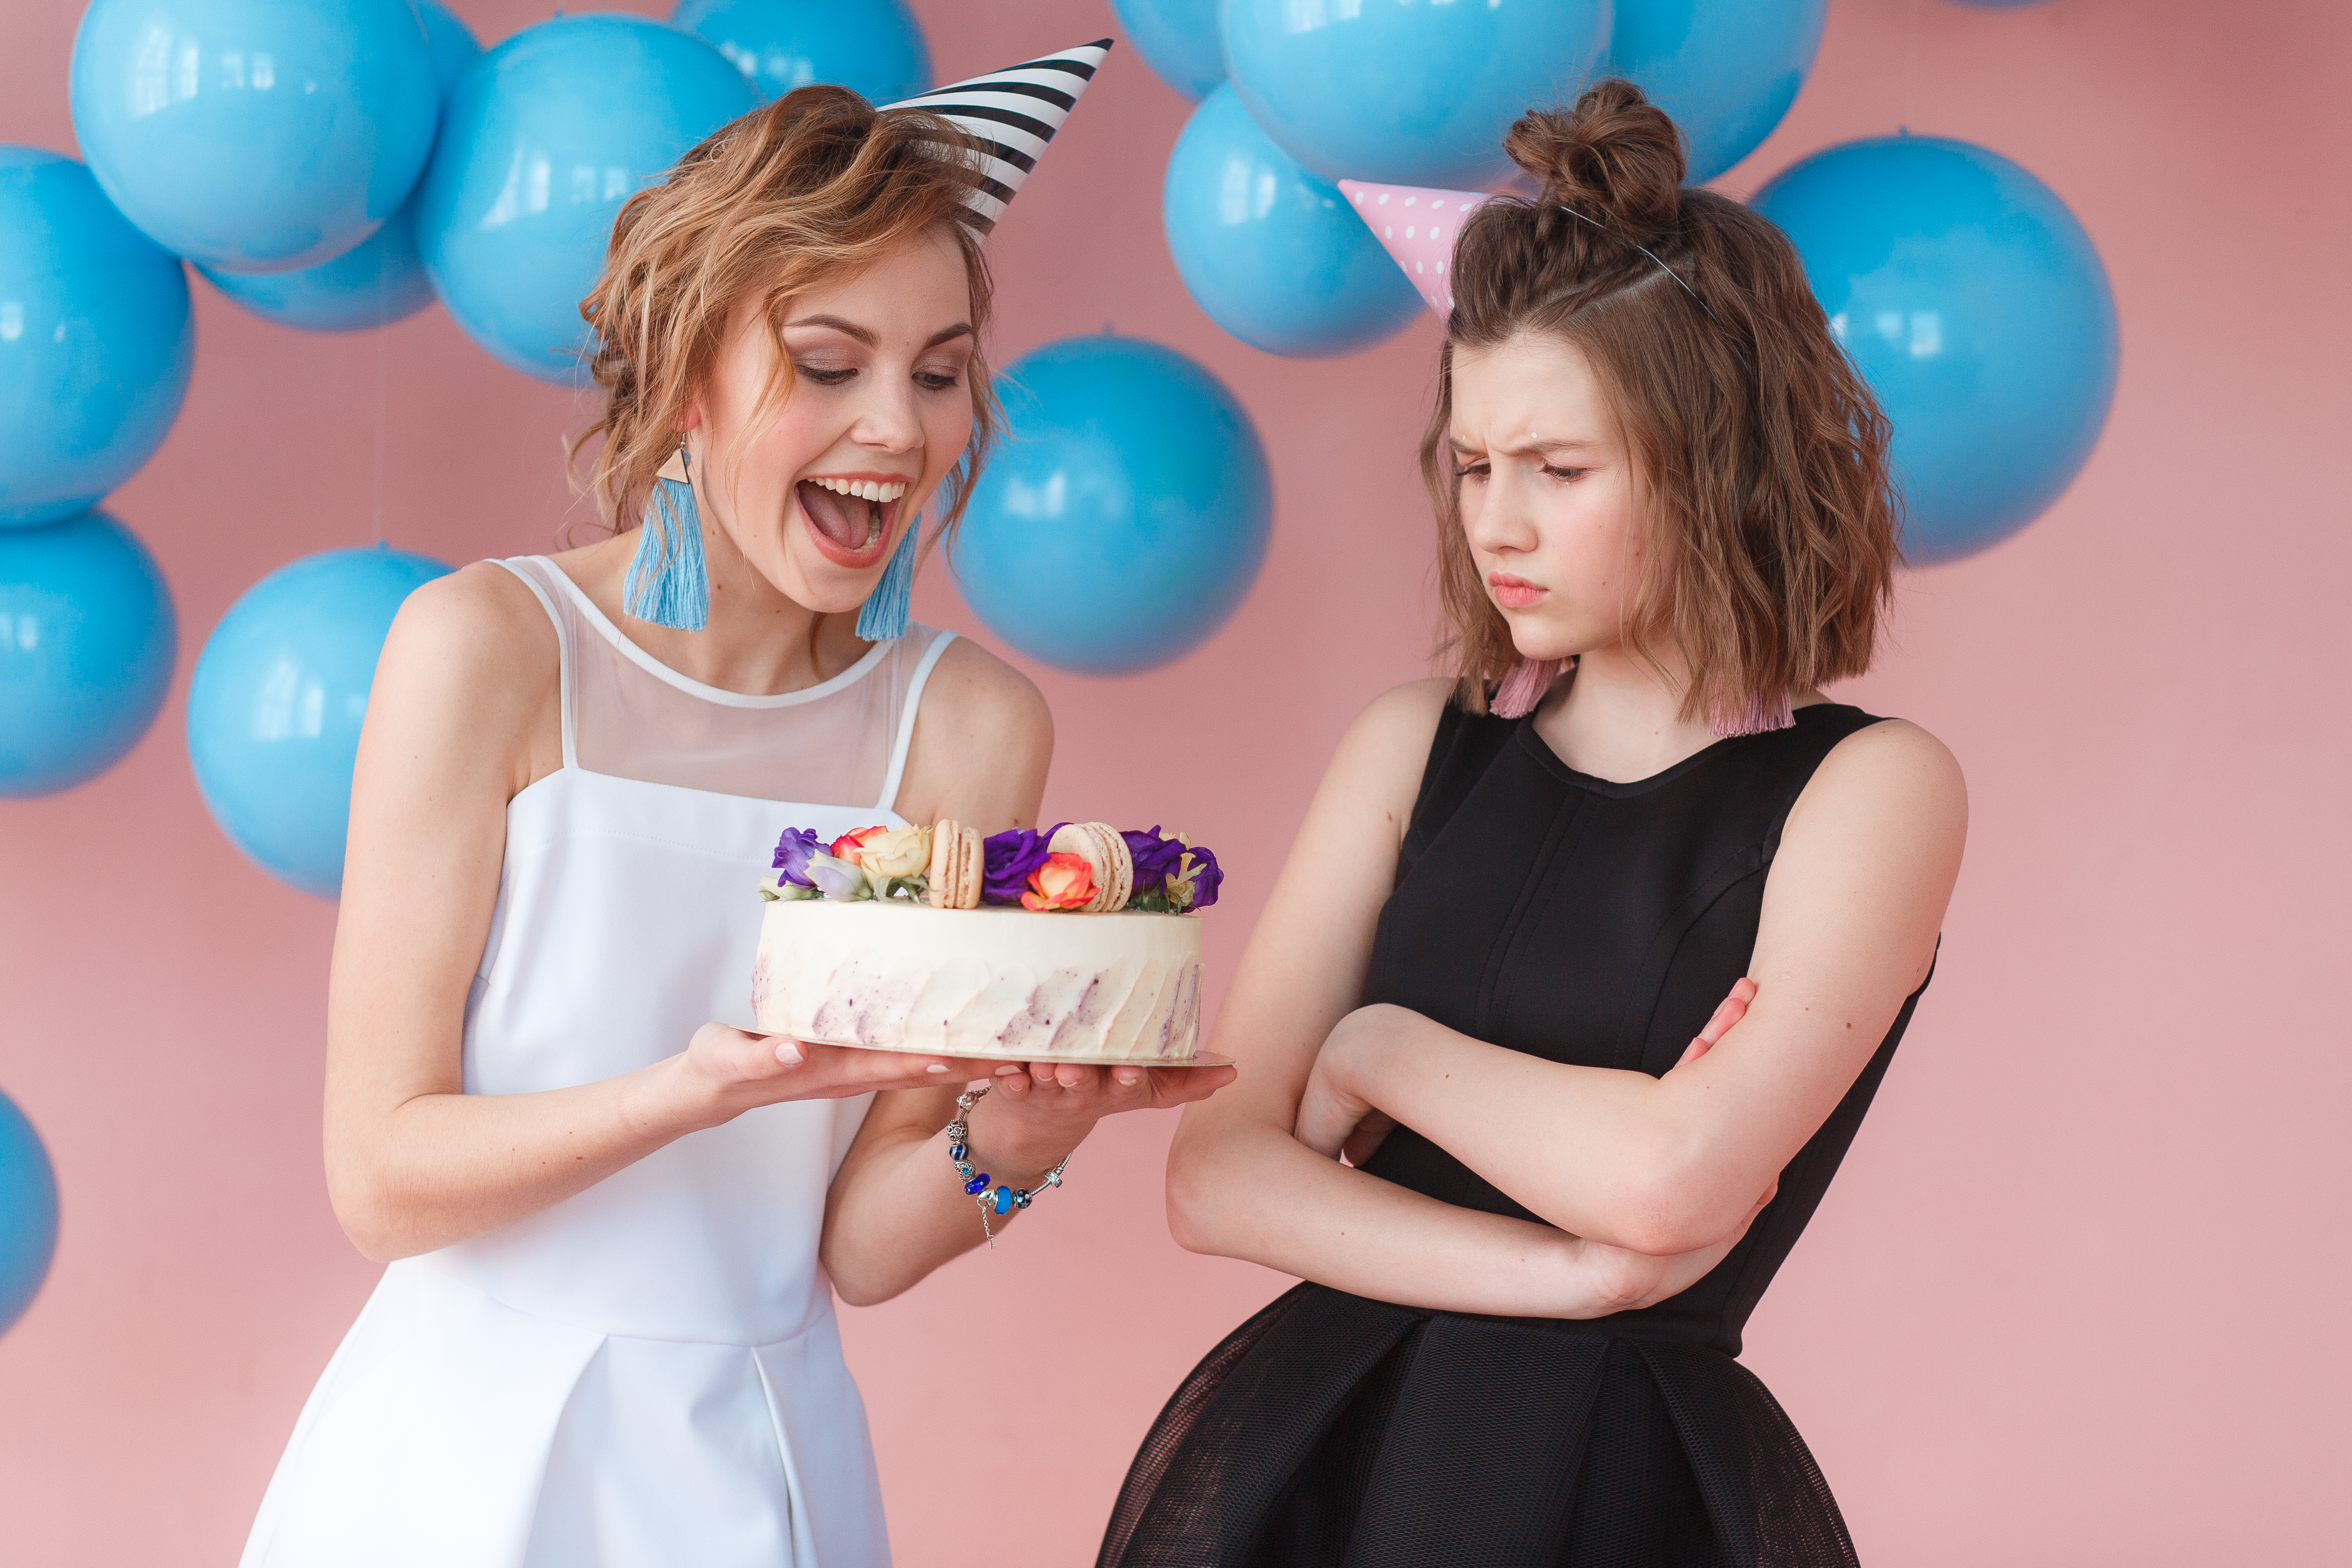 Two teenagers holding a birthday cake, one smiling and the other frowning | Source: Freepik